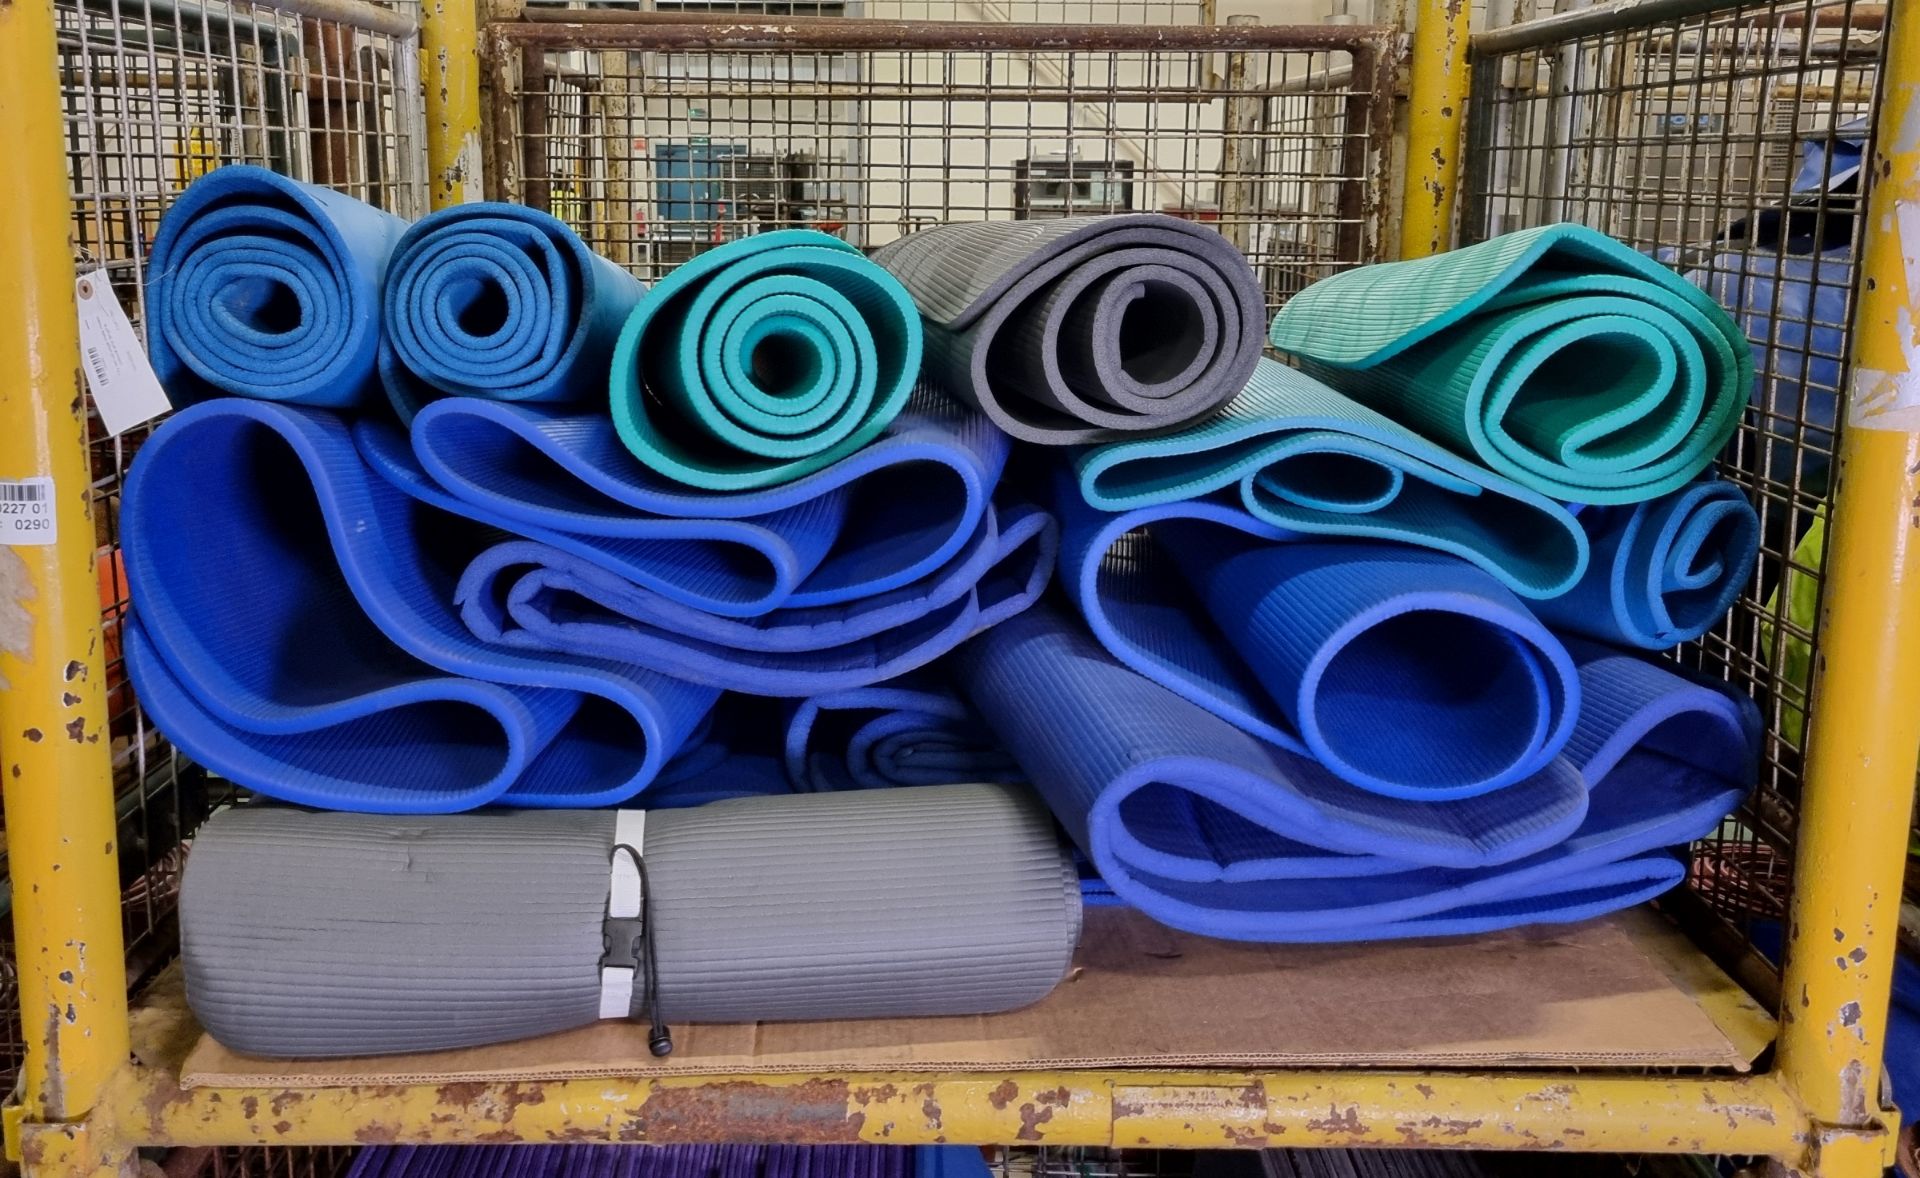 35x folding yoga mats, 17x roll-up yoga mats mixed colours and lengths - Image 2 of 5